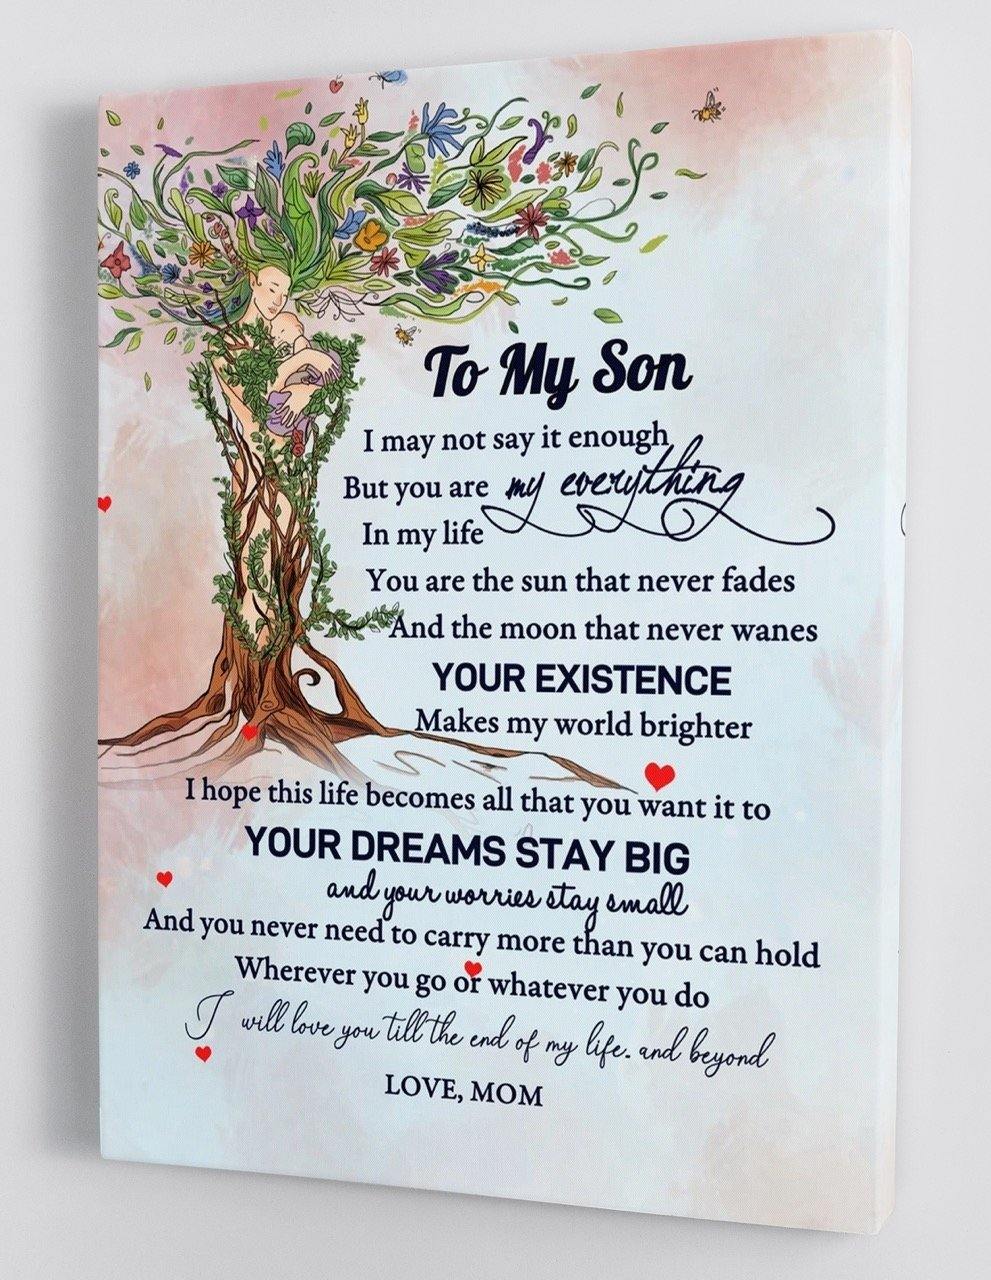 To My Son - From Mom - Framed Canvas Gift MS017 - DivesArt LLC